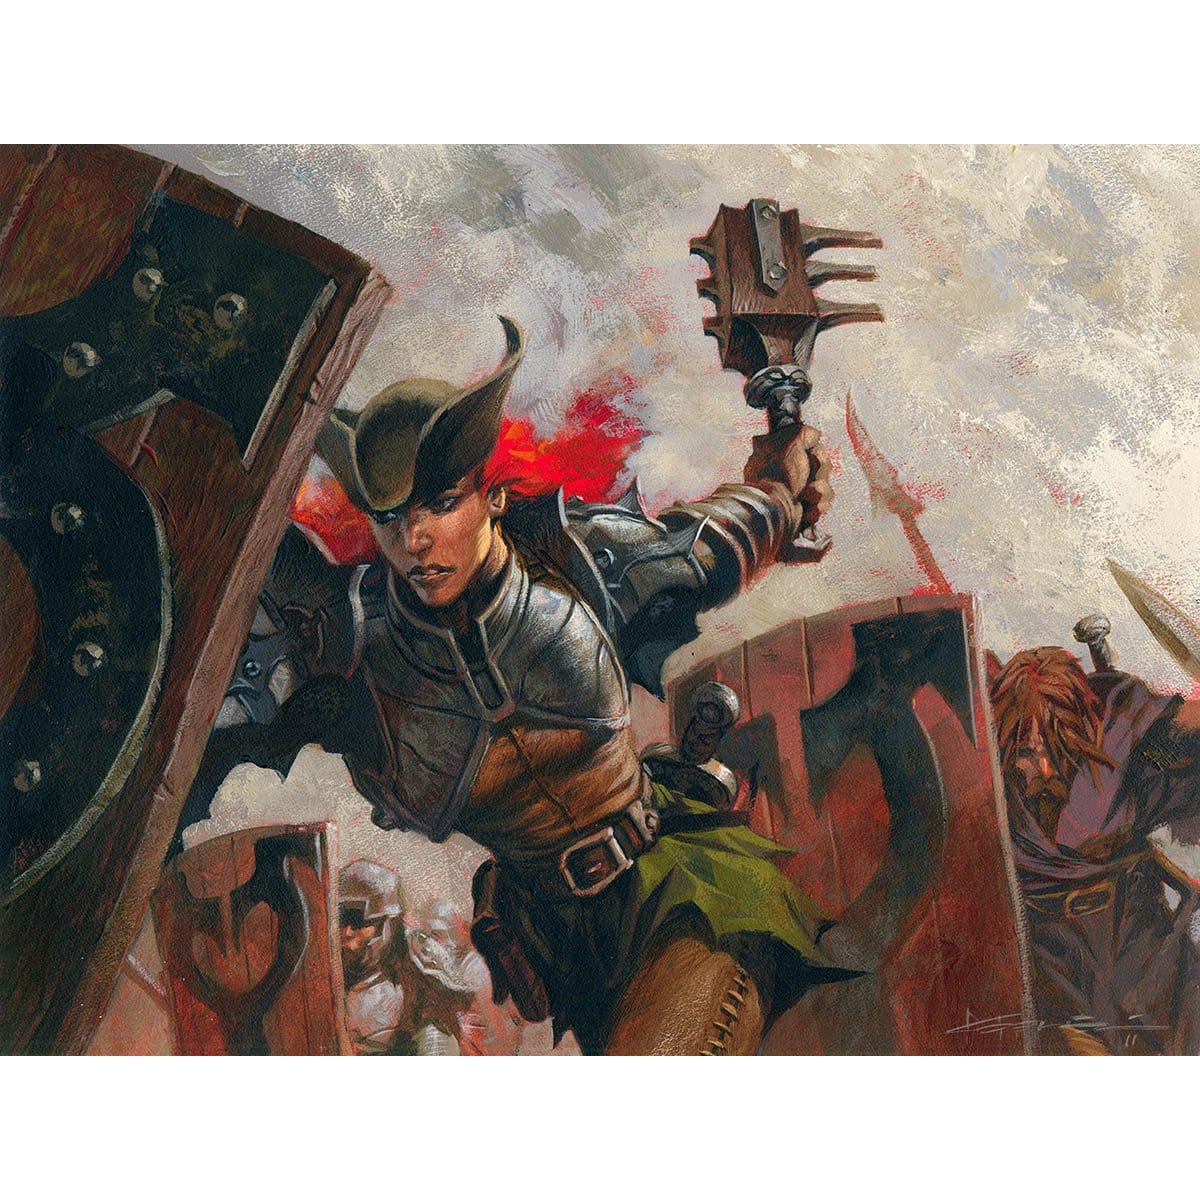 Kruin Striker Print - Print - Original Magic Art - Accessories for Magic the Gathering and other card games